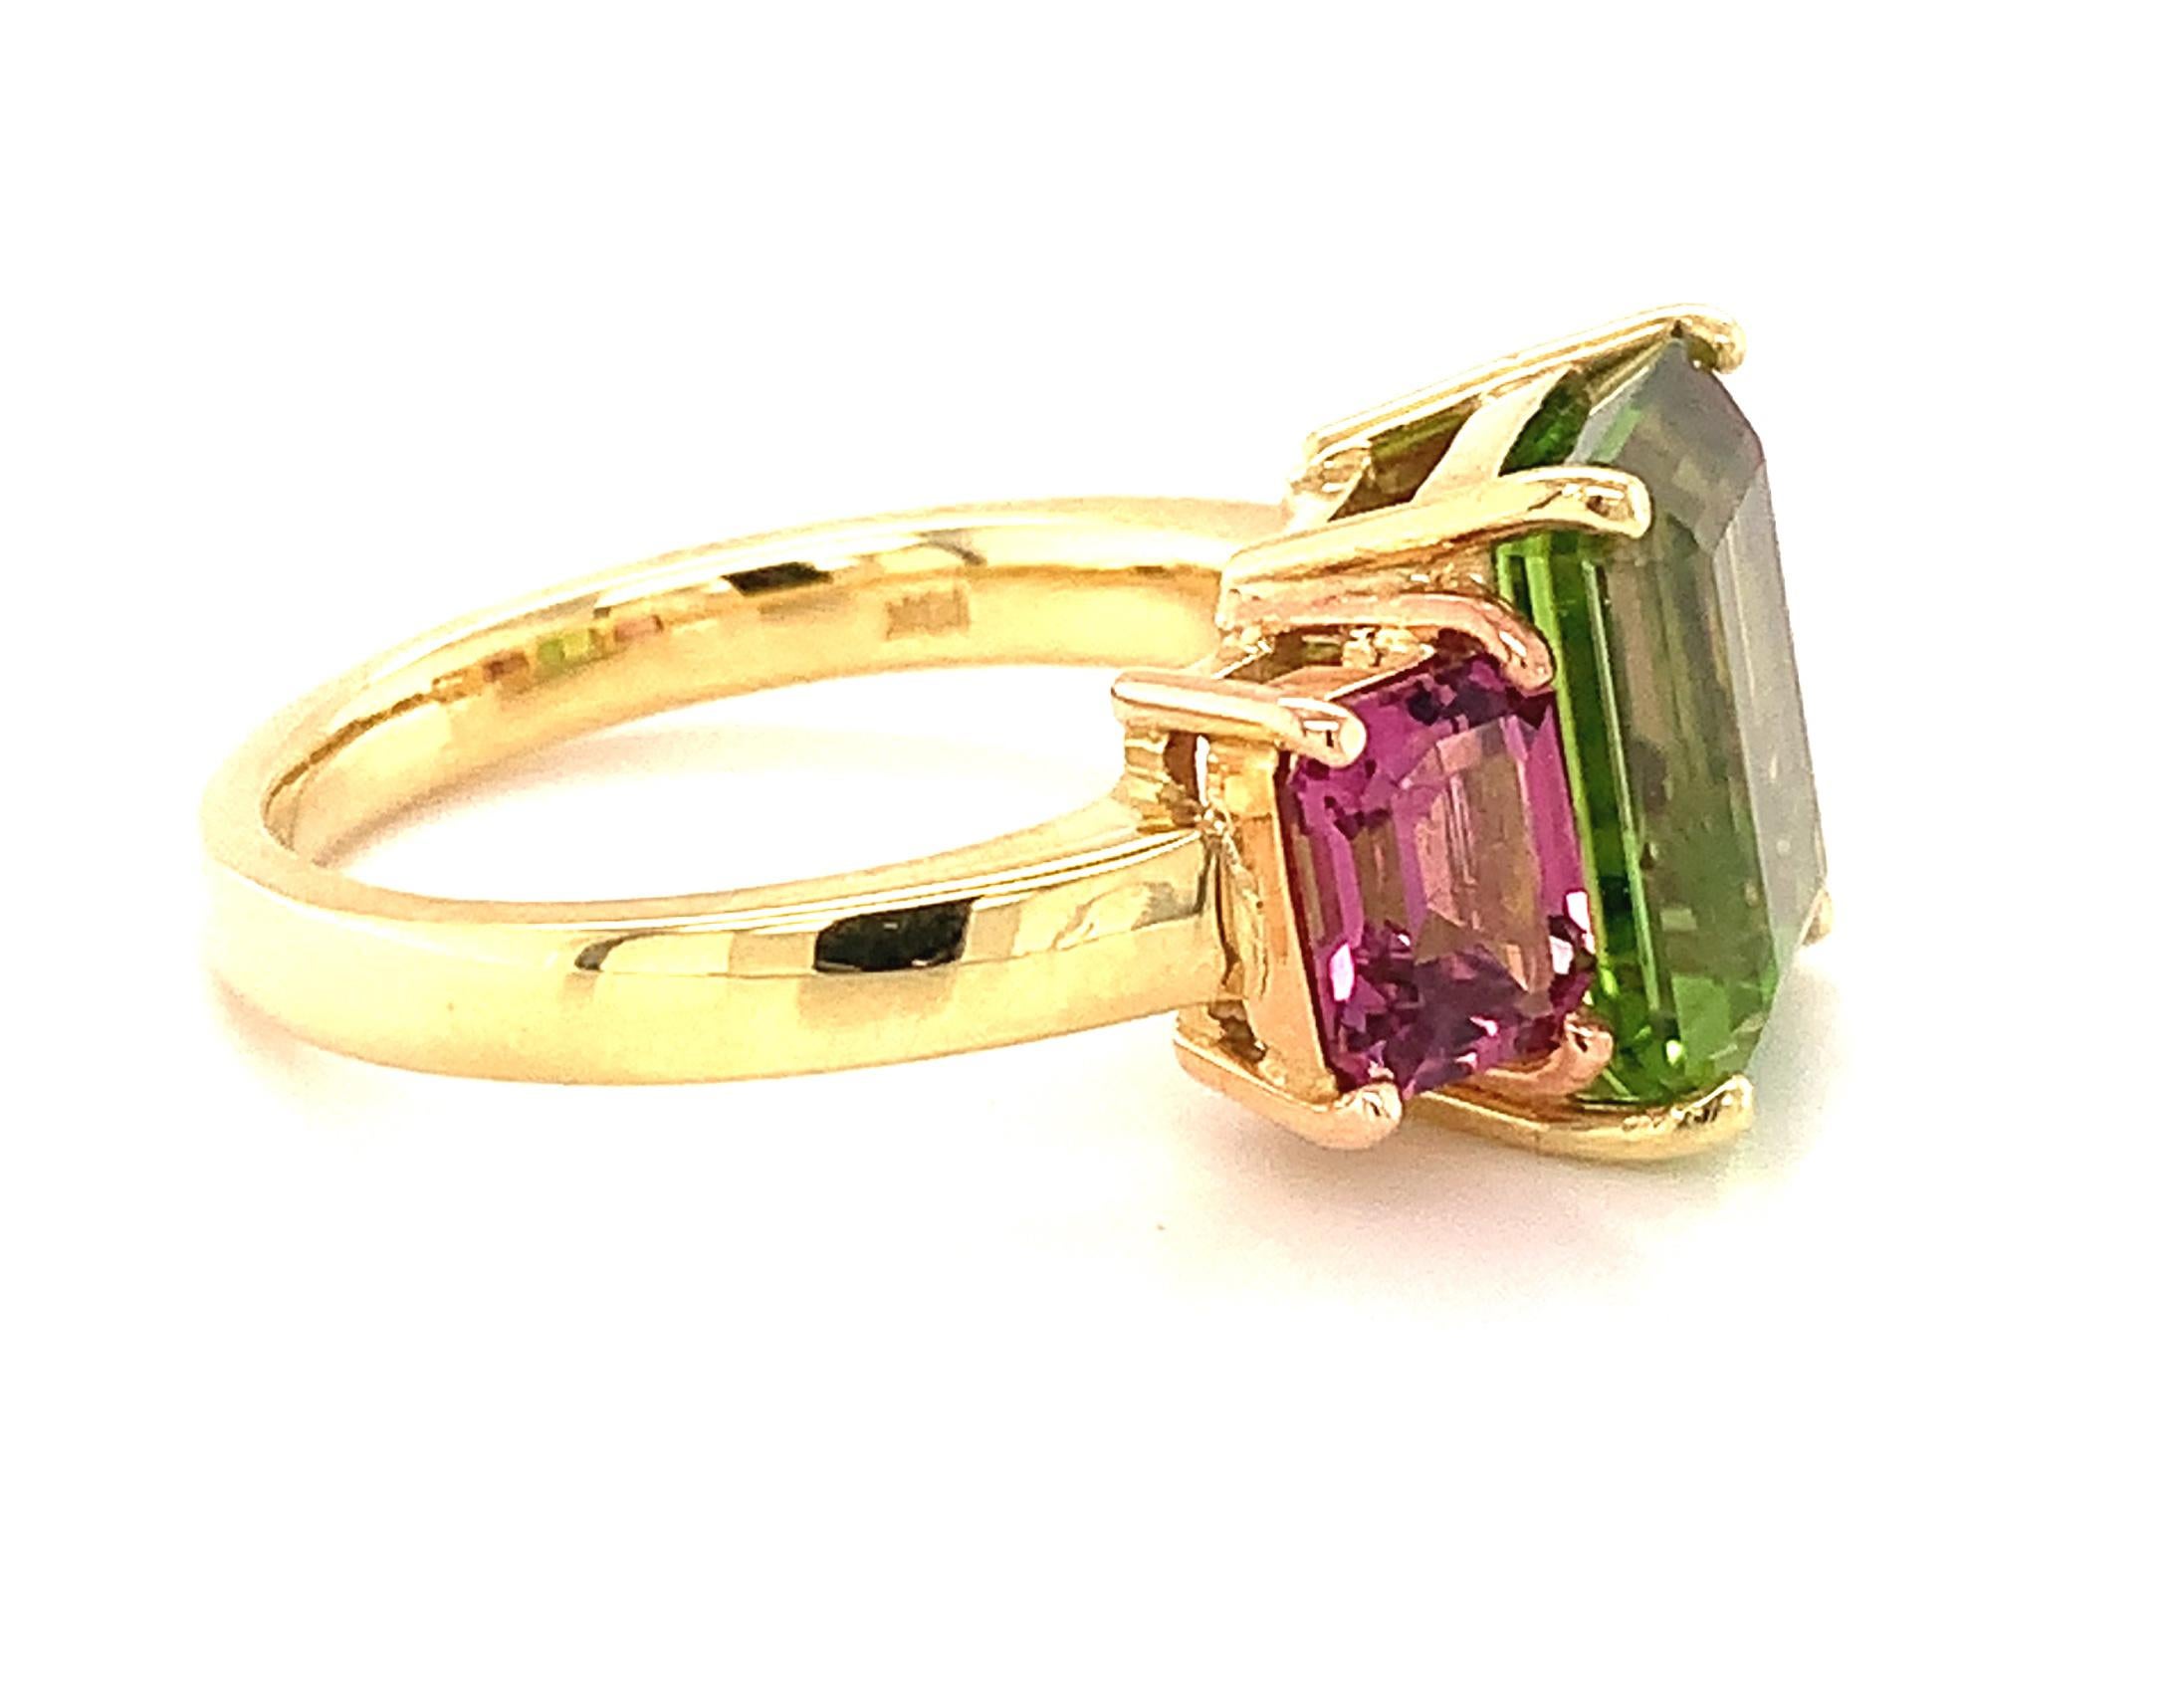 Emerald Cut 5.49 Carat Peridot and Rhodolite Garnet Three-Stone Ring in Yellow and Rose Gold For Sale